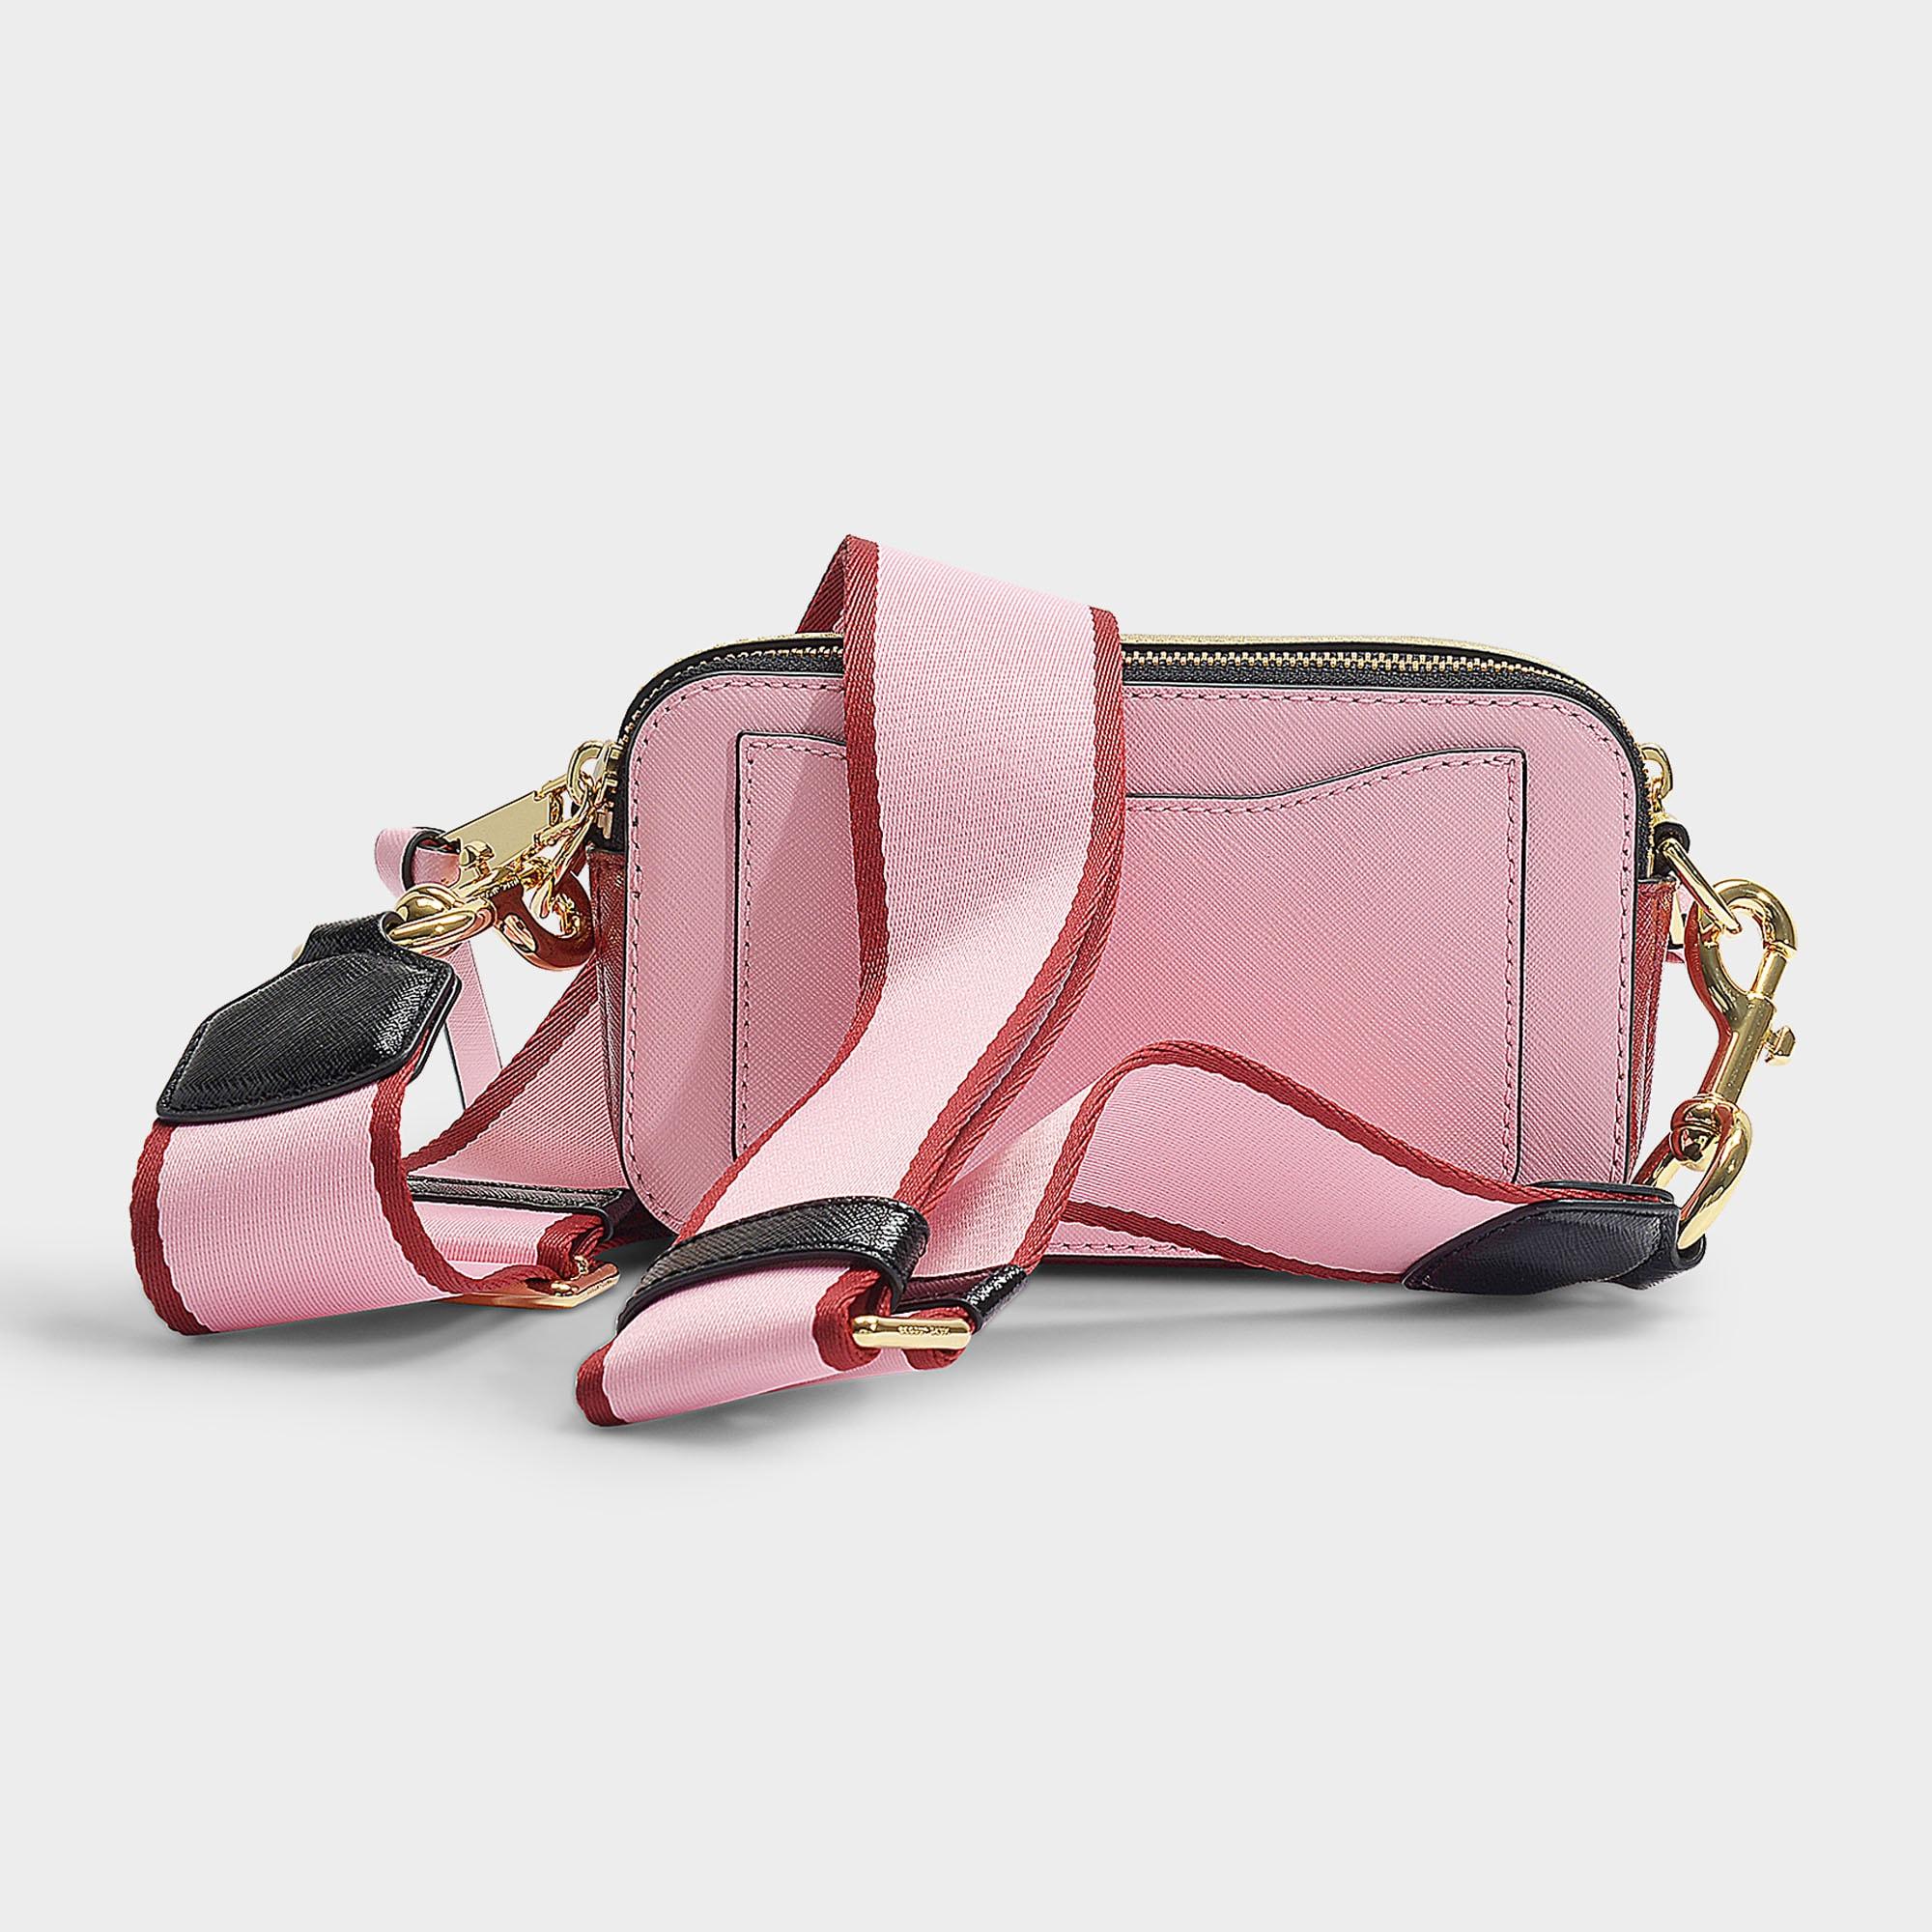 Marc Jacobs Snapshot Bag In Baby Pink And Red Leather With Polyurethane  Coating